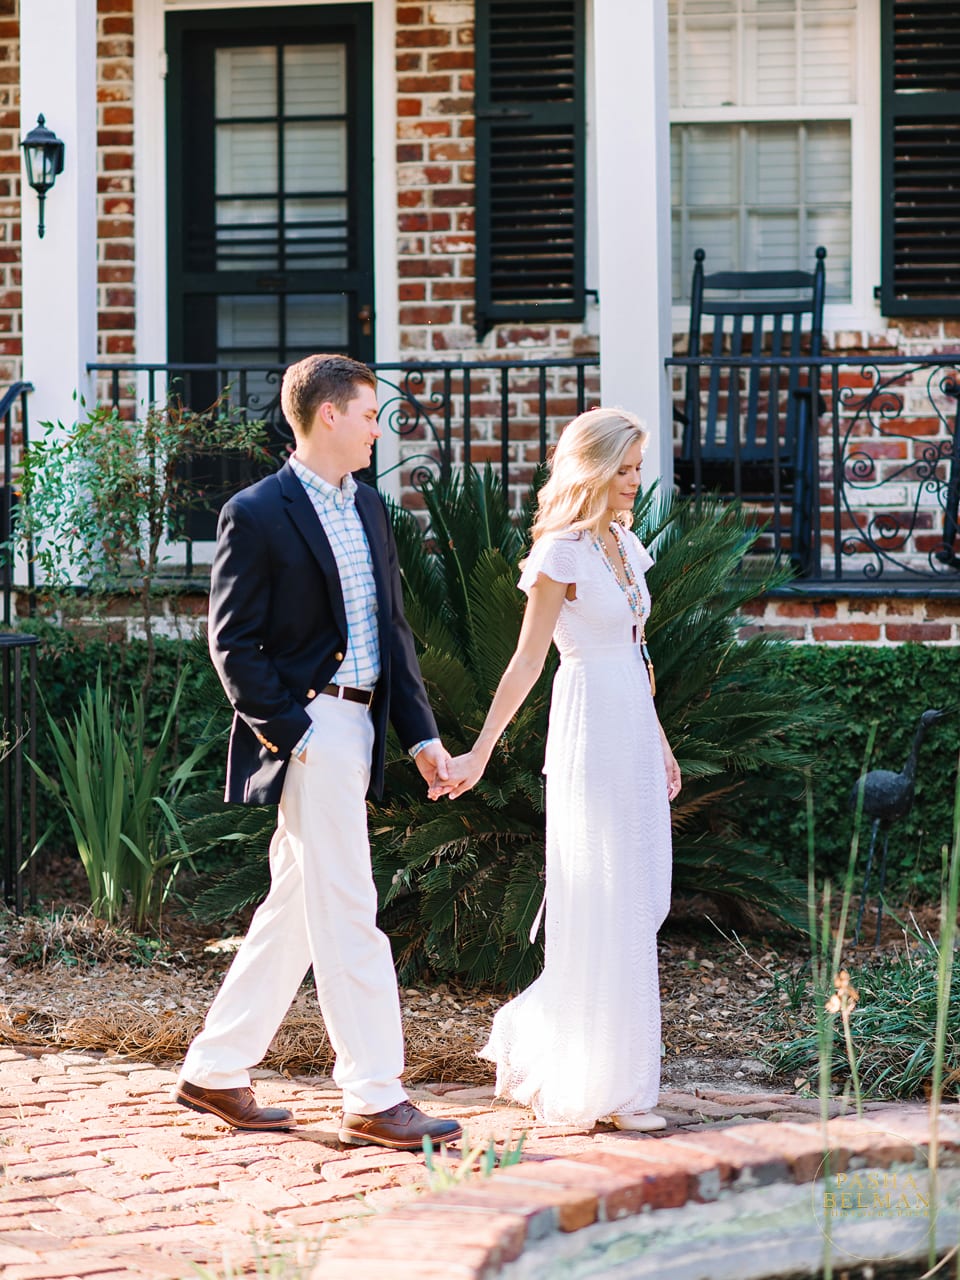 Engagement Photography | Engagement Pictures Charleston | Spanish Moss Myrtle Beach | Georgetown | South Carolina | Mansfield Plantation 